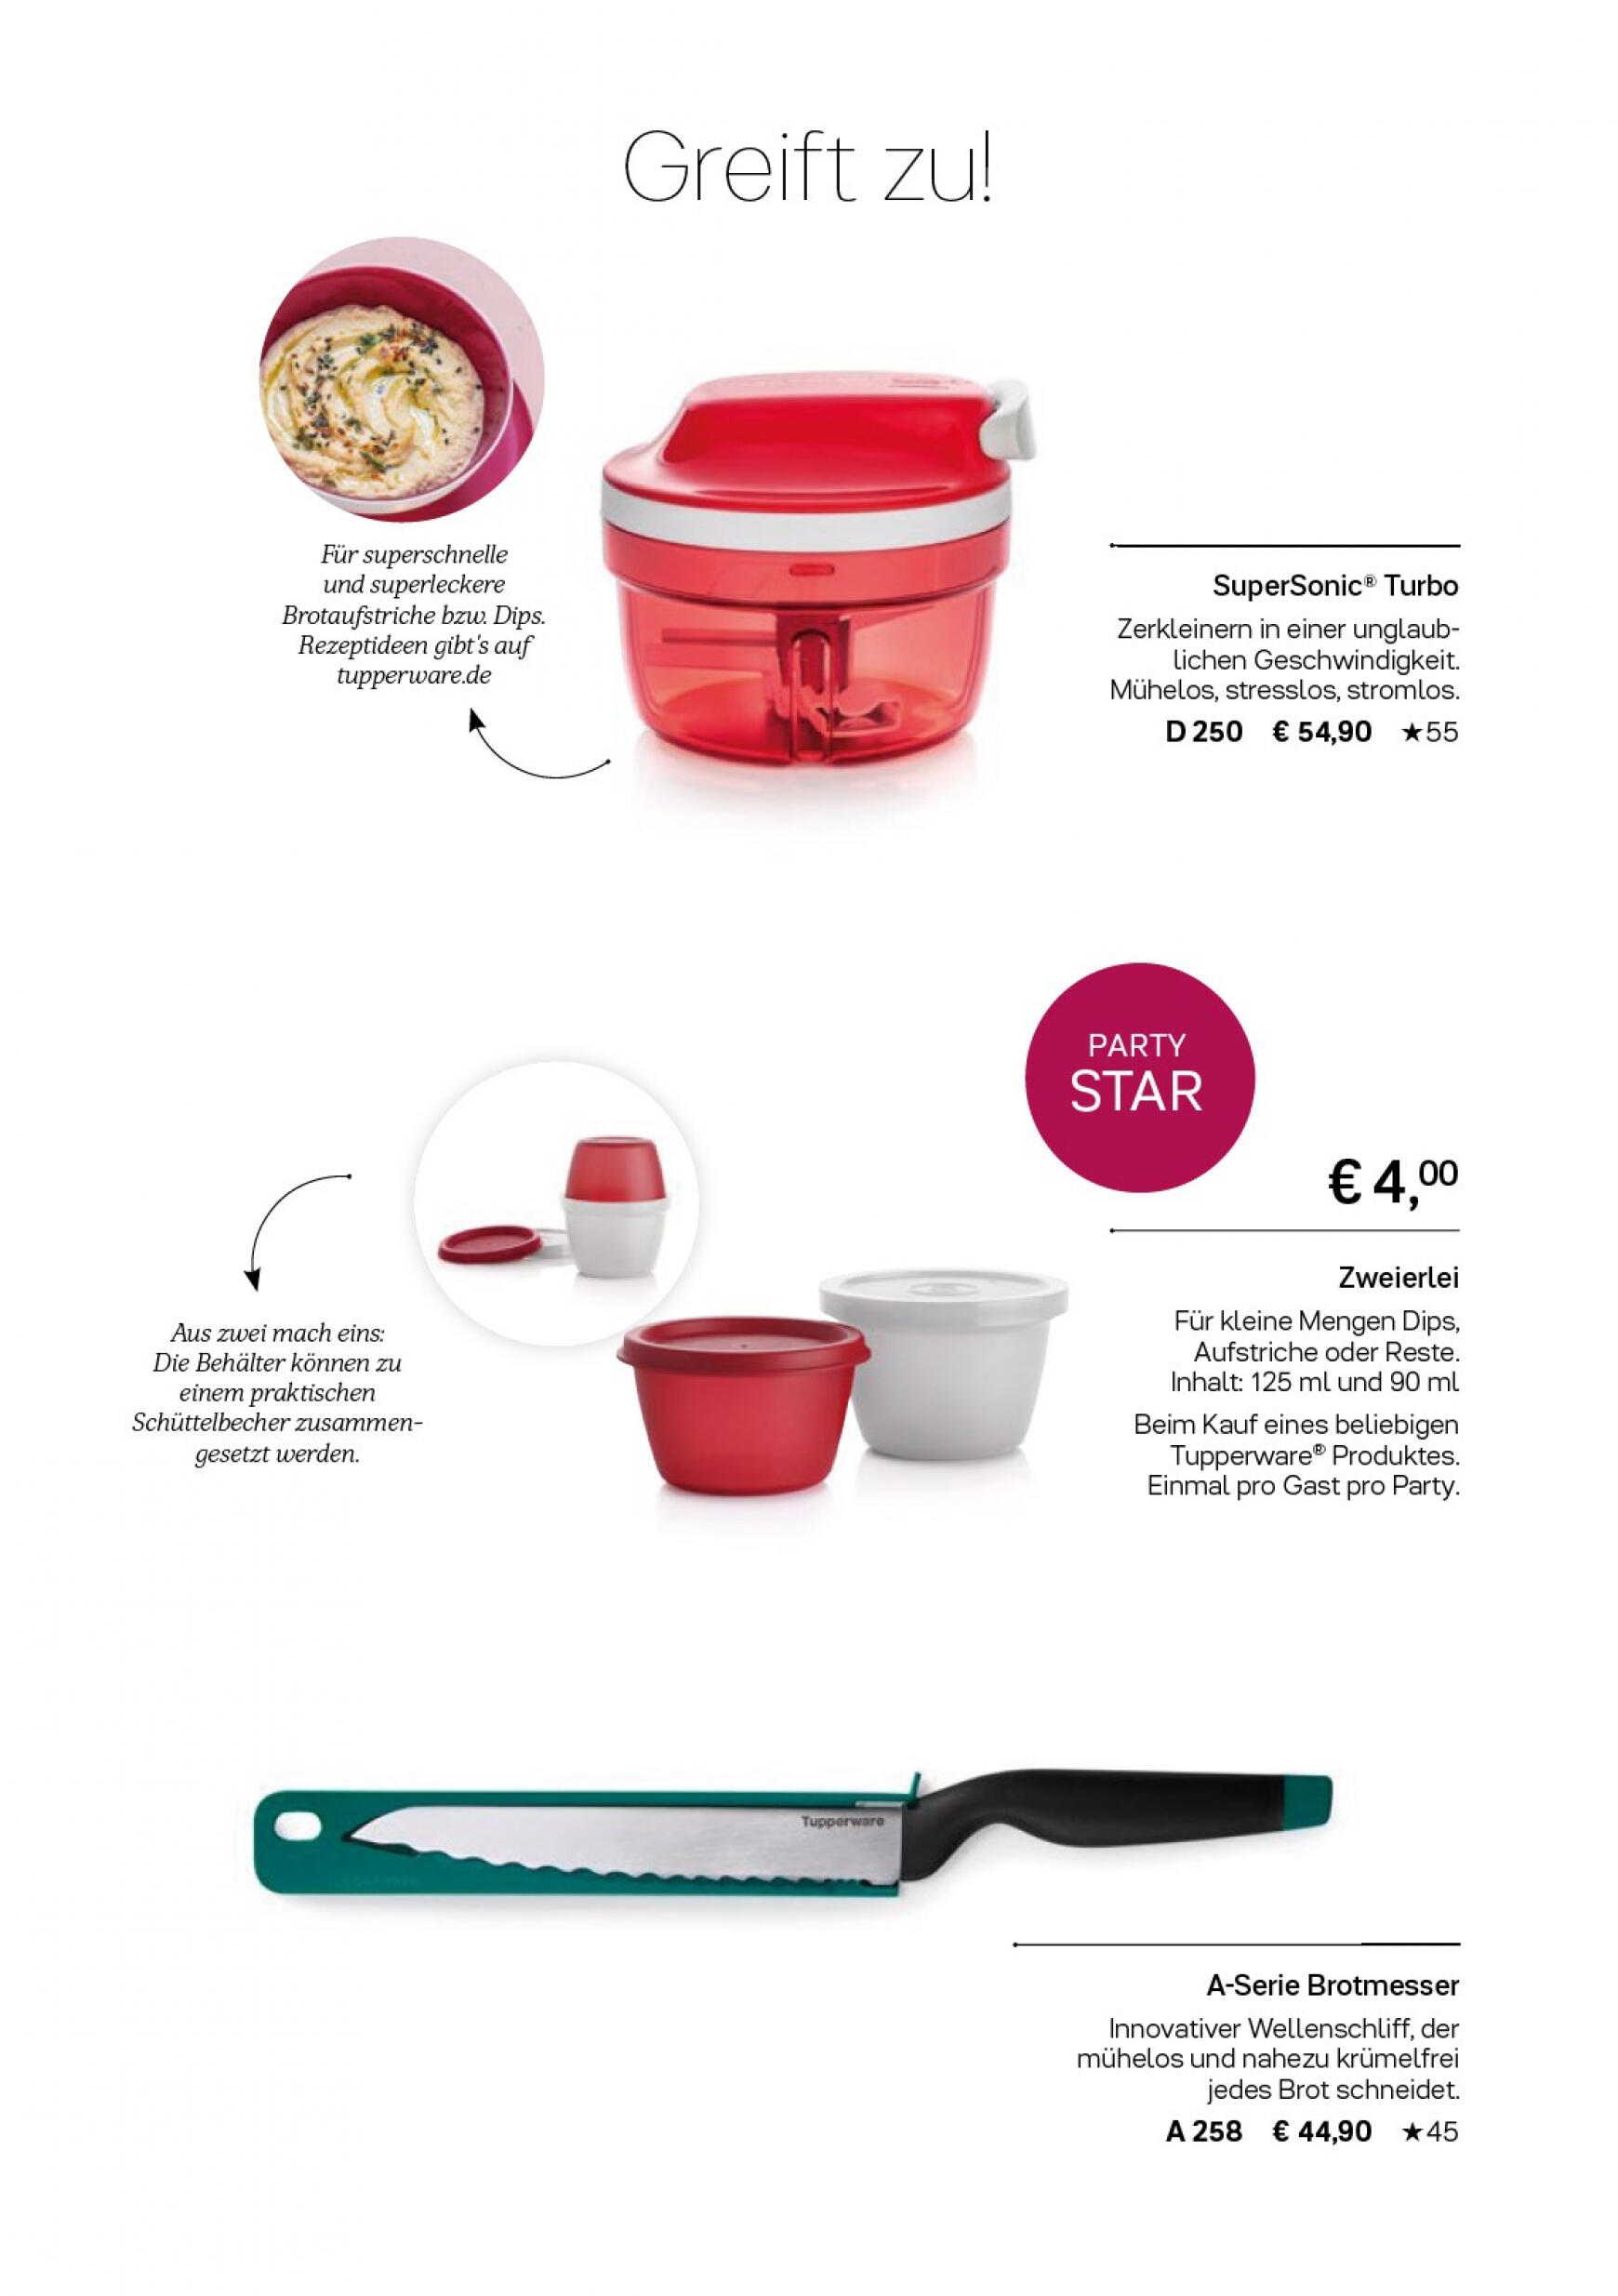 tupperware - Tupperware Online & Party - page: 5